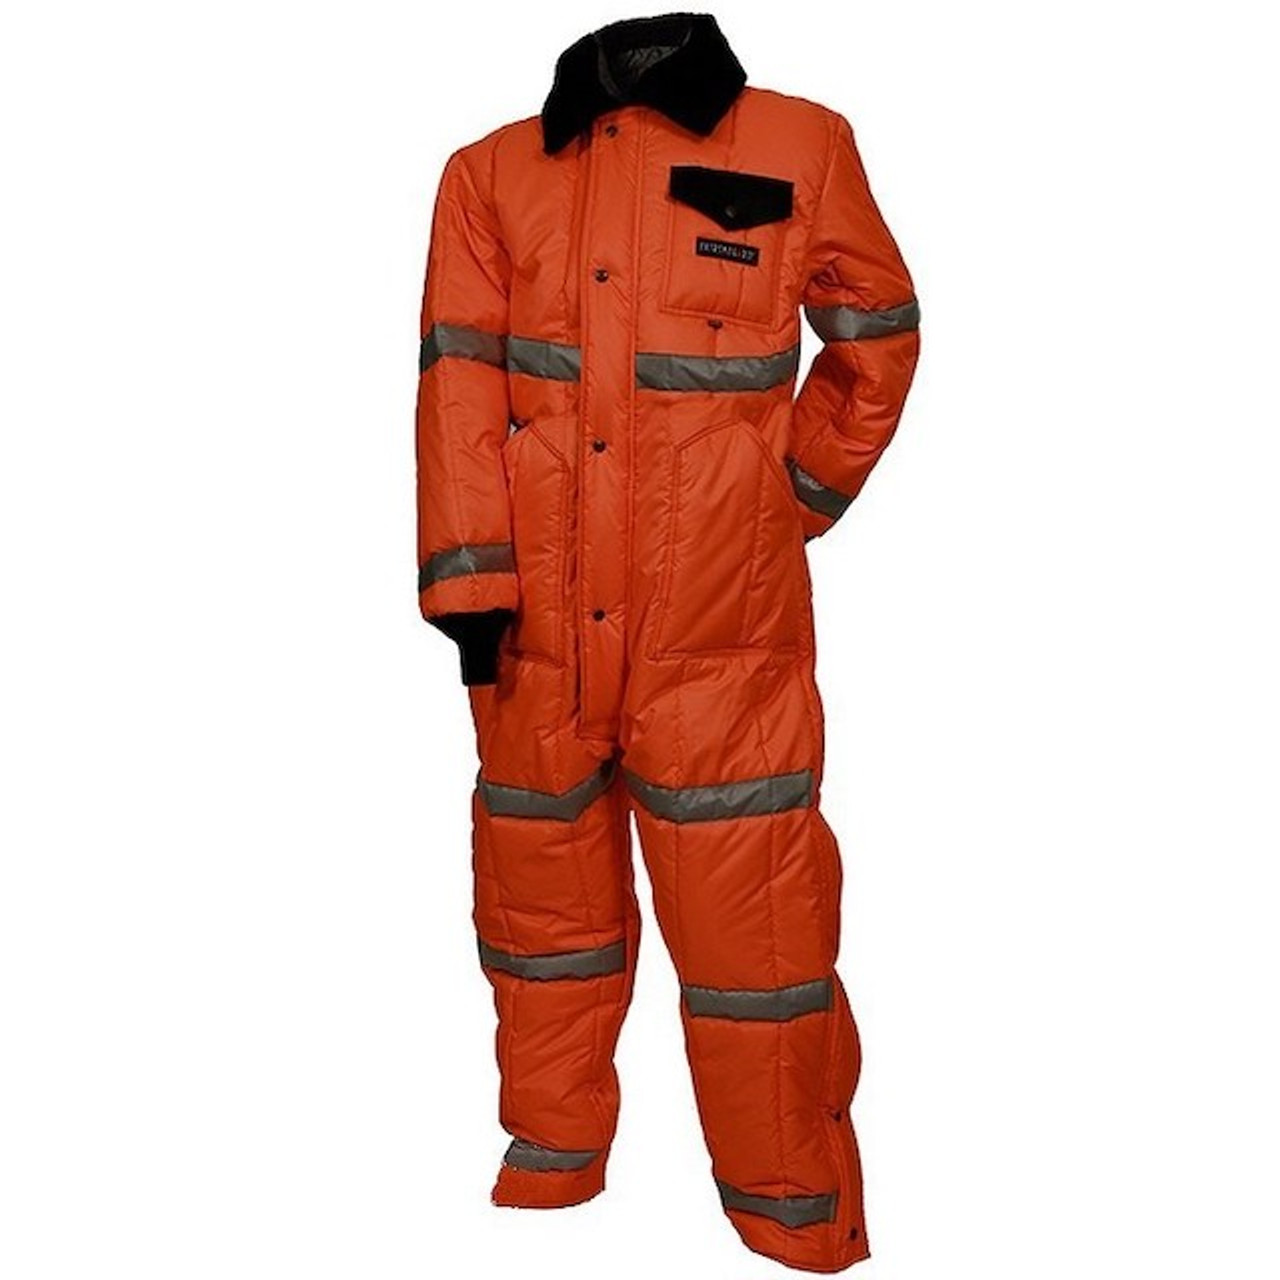 https://cdn11.bigcommerce.com/s-eokud1lf5m/images/stencil/1280x1280/products/1093/6063/High-Vis-Insualted-Coverall-Freezer-Suit__66792.1658355794.jpg?c=1